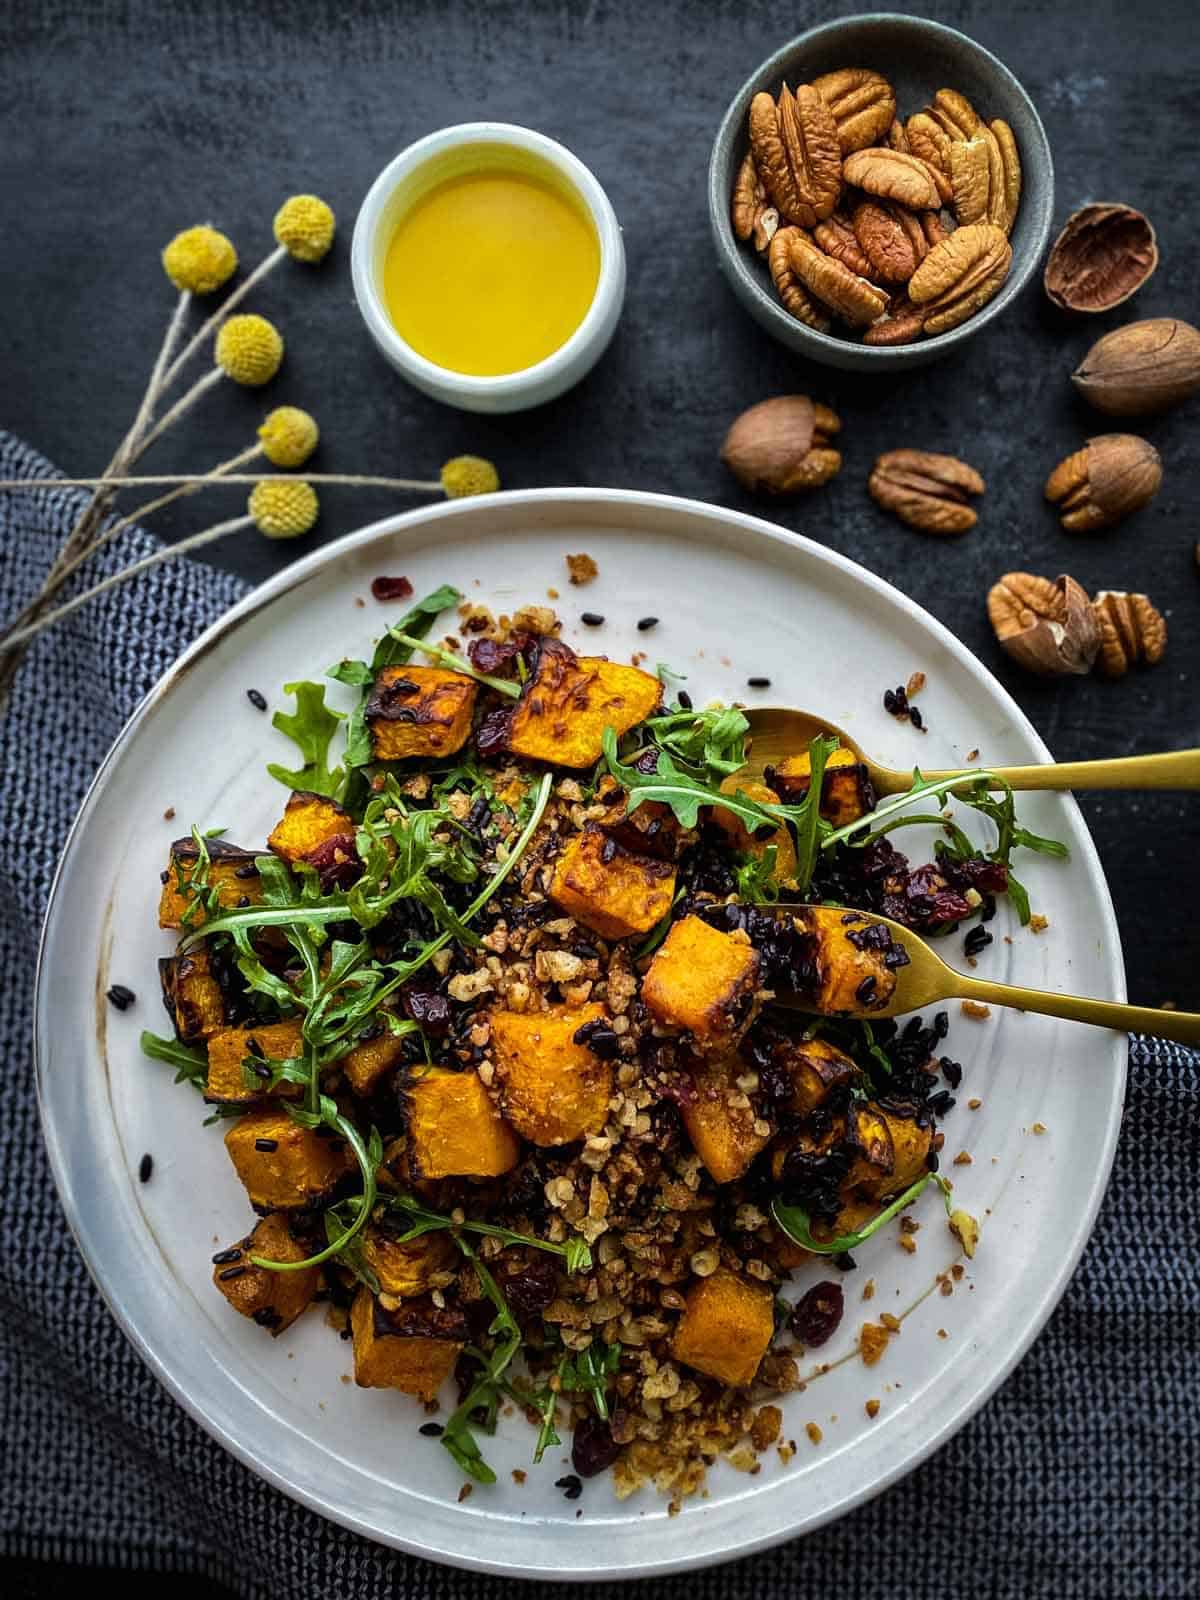 Vegan Salad with Butternut Squash and Cranberries